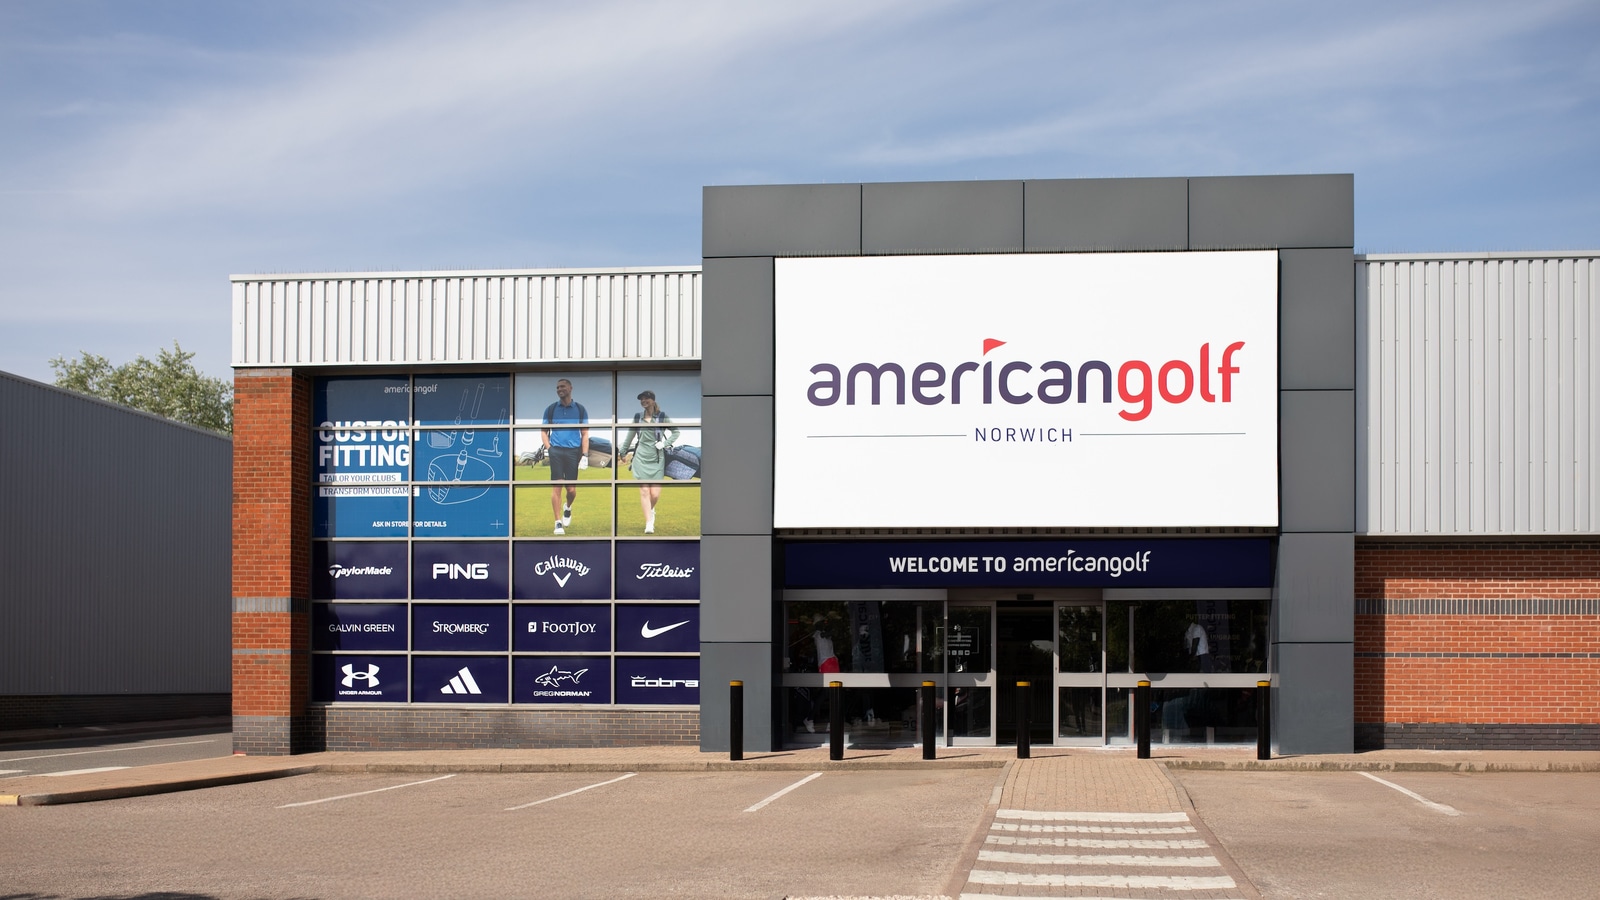 Smoking Gun joins the club with American Golf – Prolific North